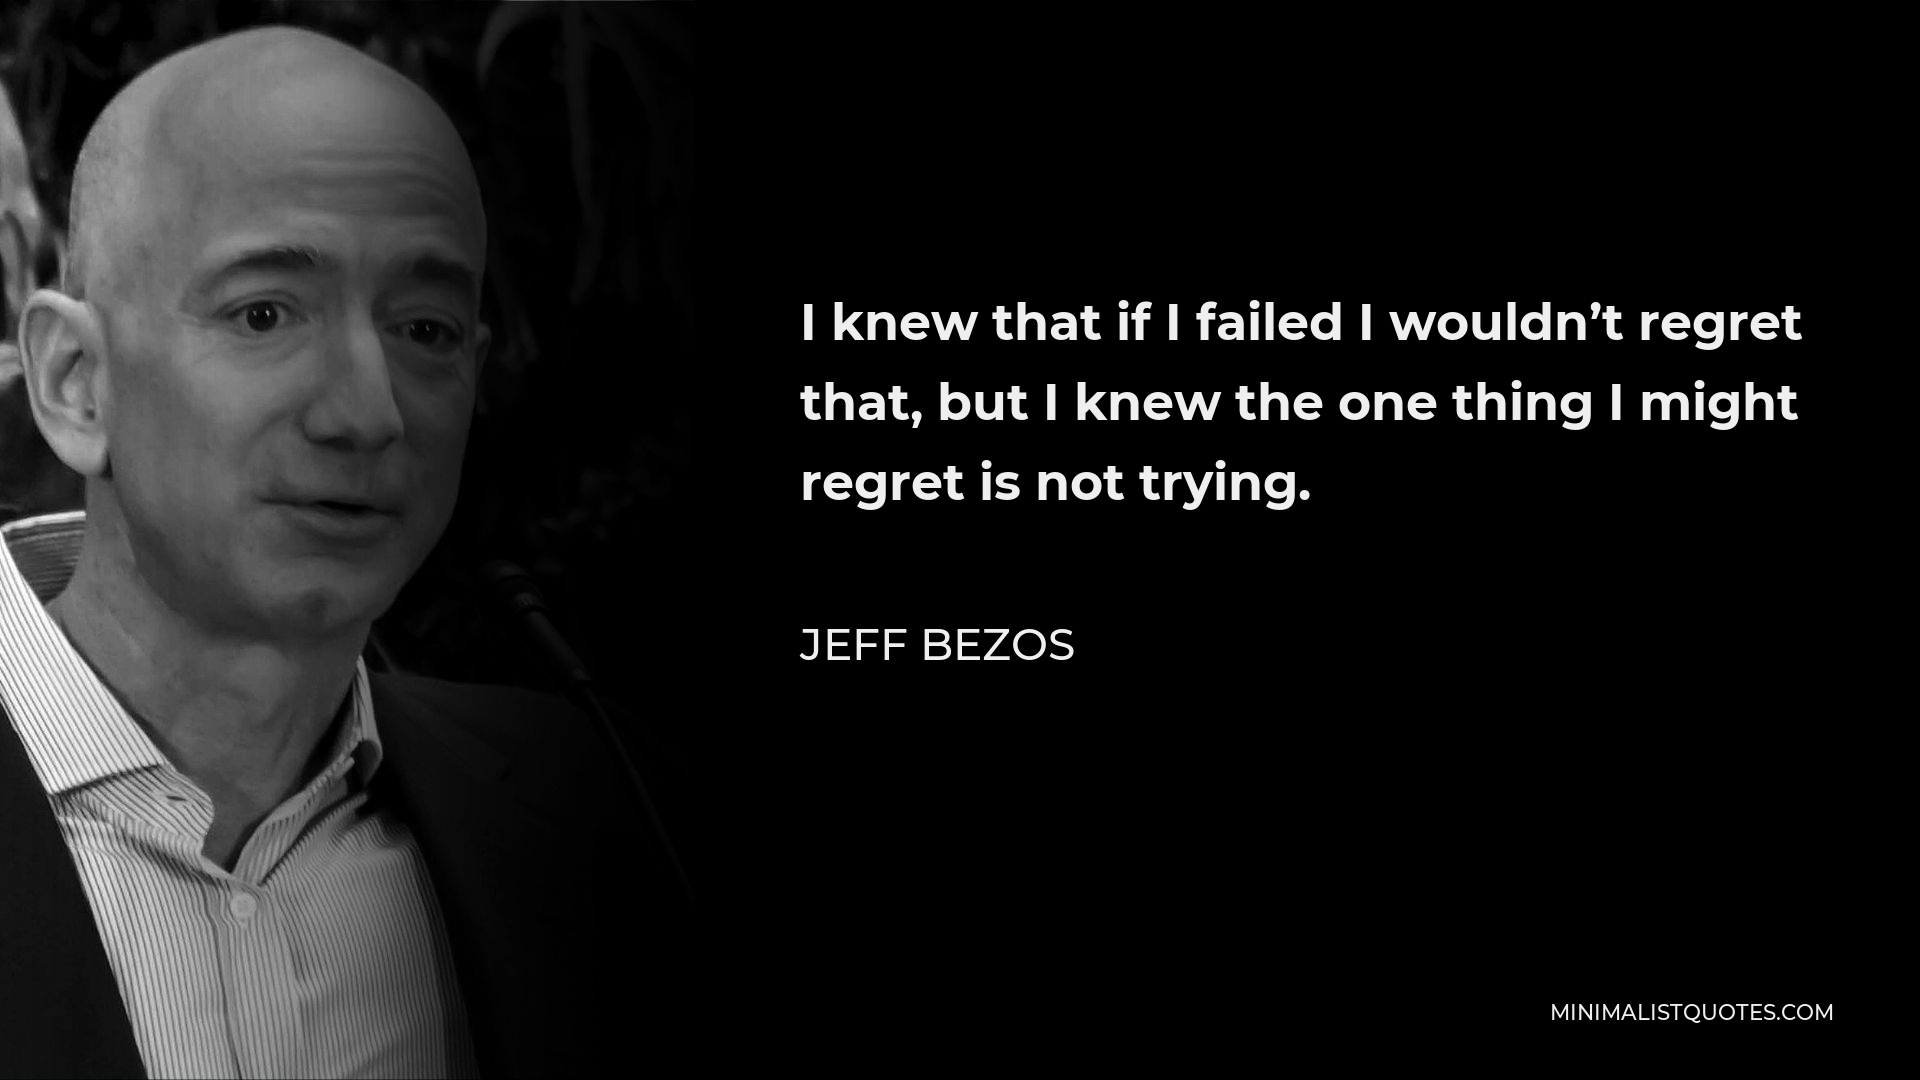 Jeff Bezos Quote - I knew that if I failed I wouldn’t regret that, but I knew the one thing I might regret is not trying.